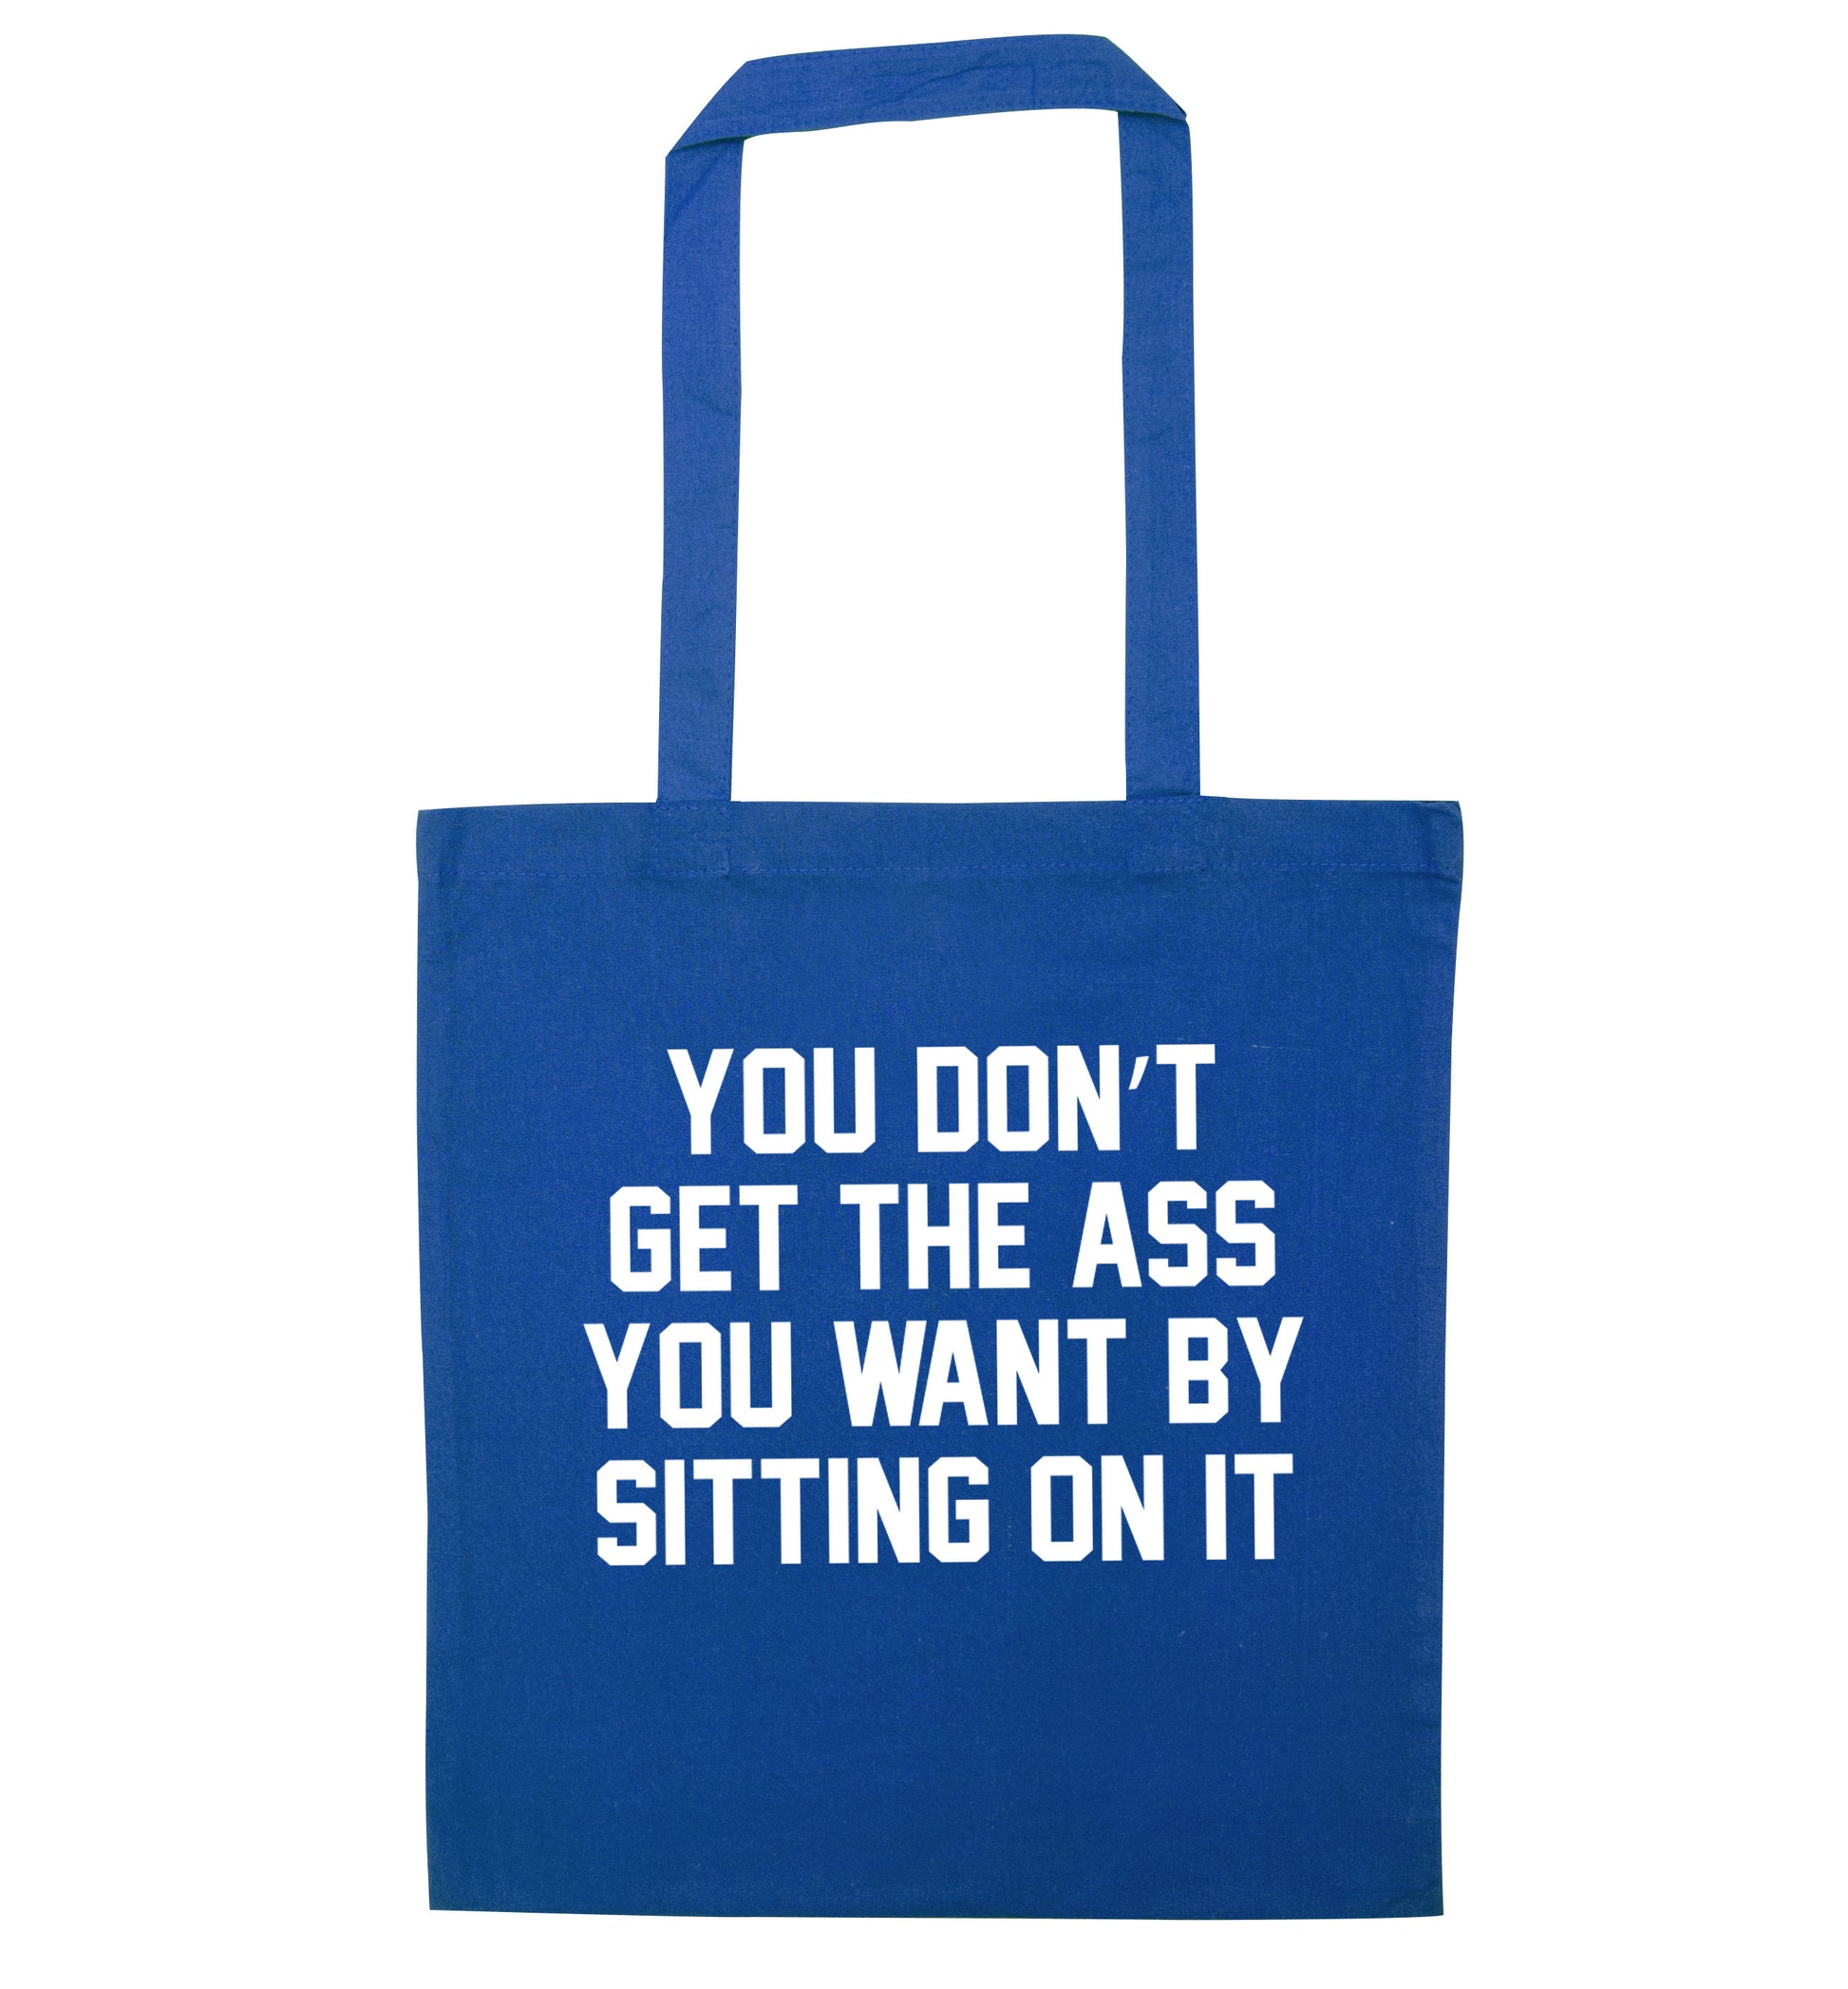 You don't get the ass you want by sitting on it blue tote bag